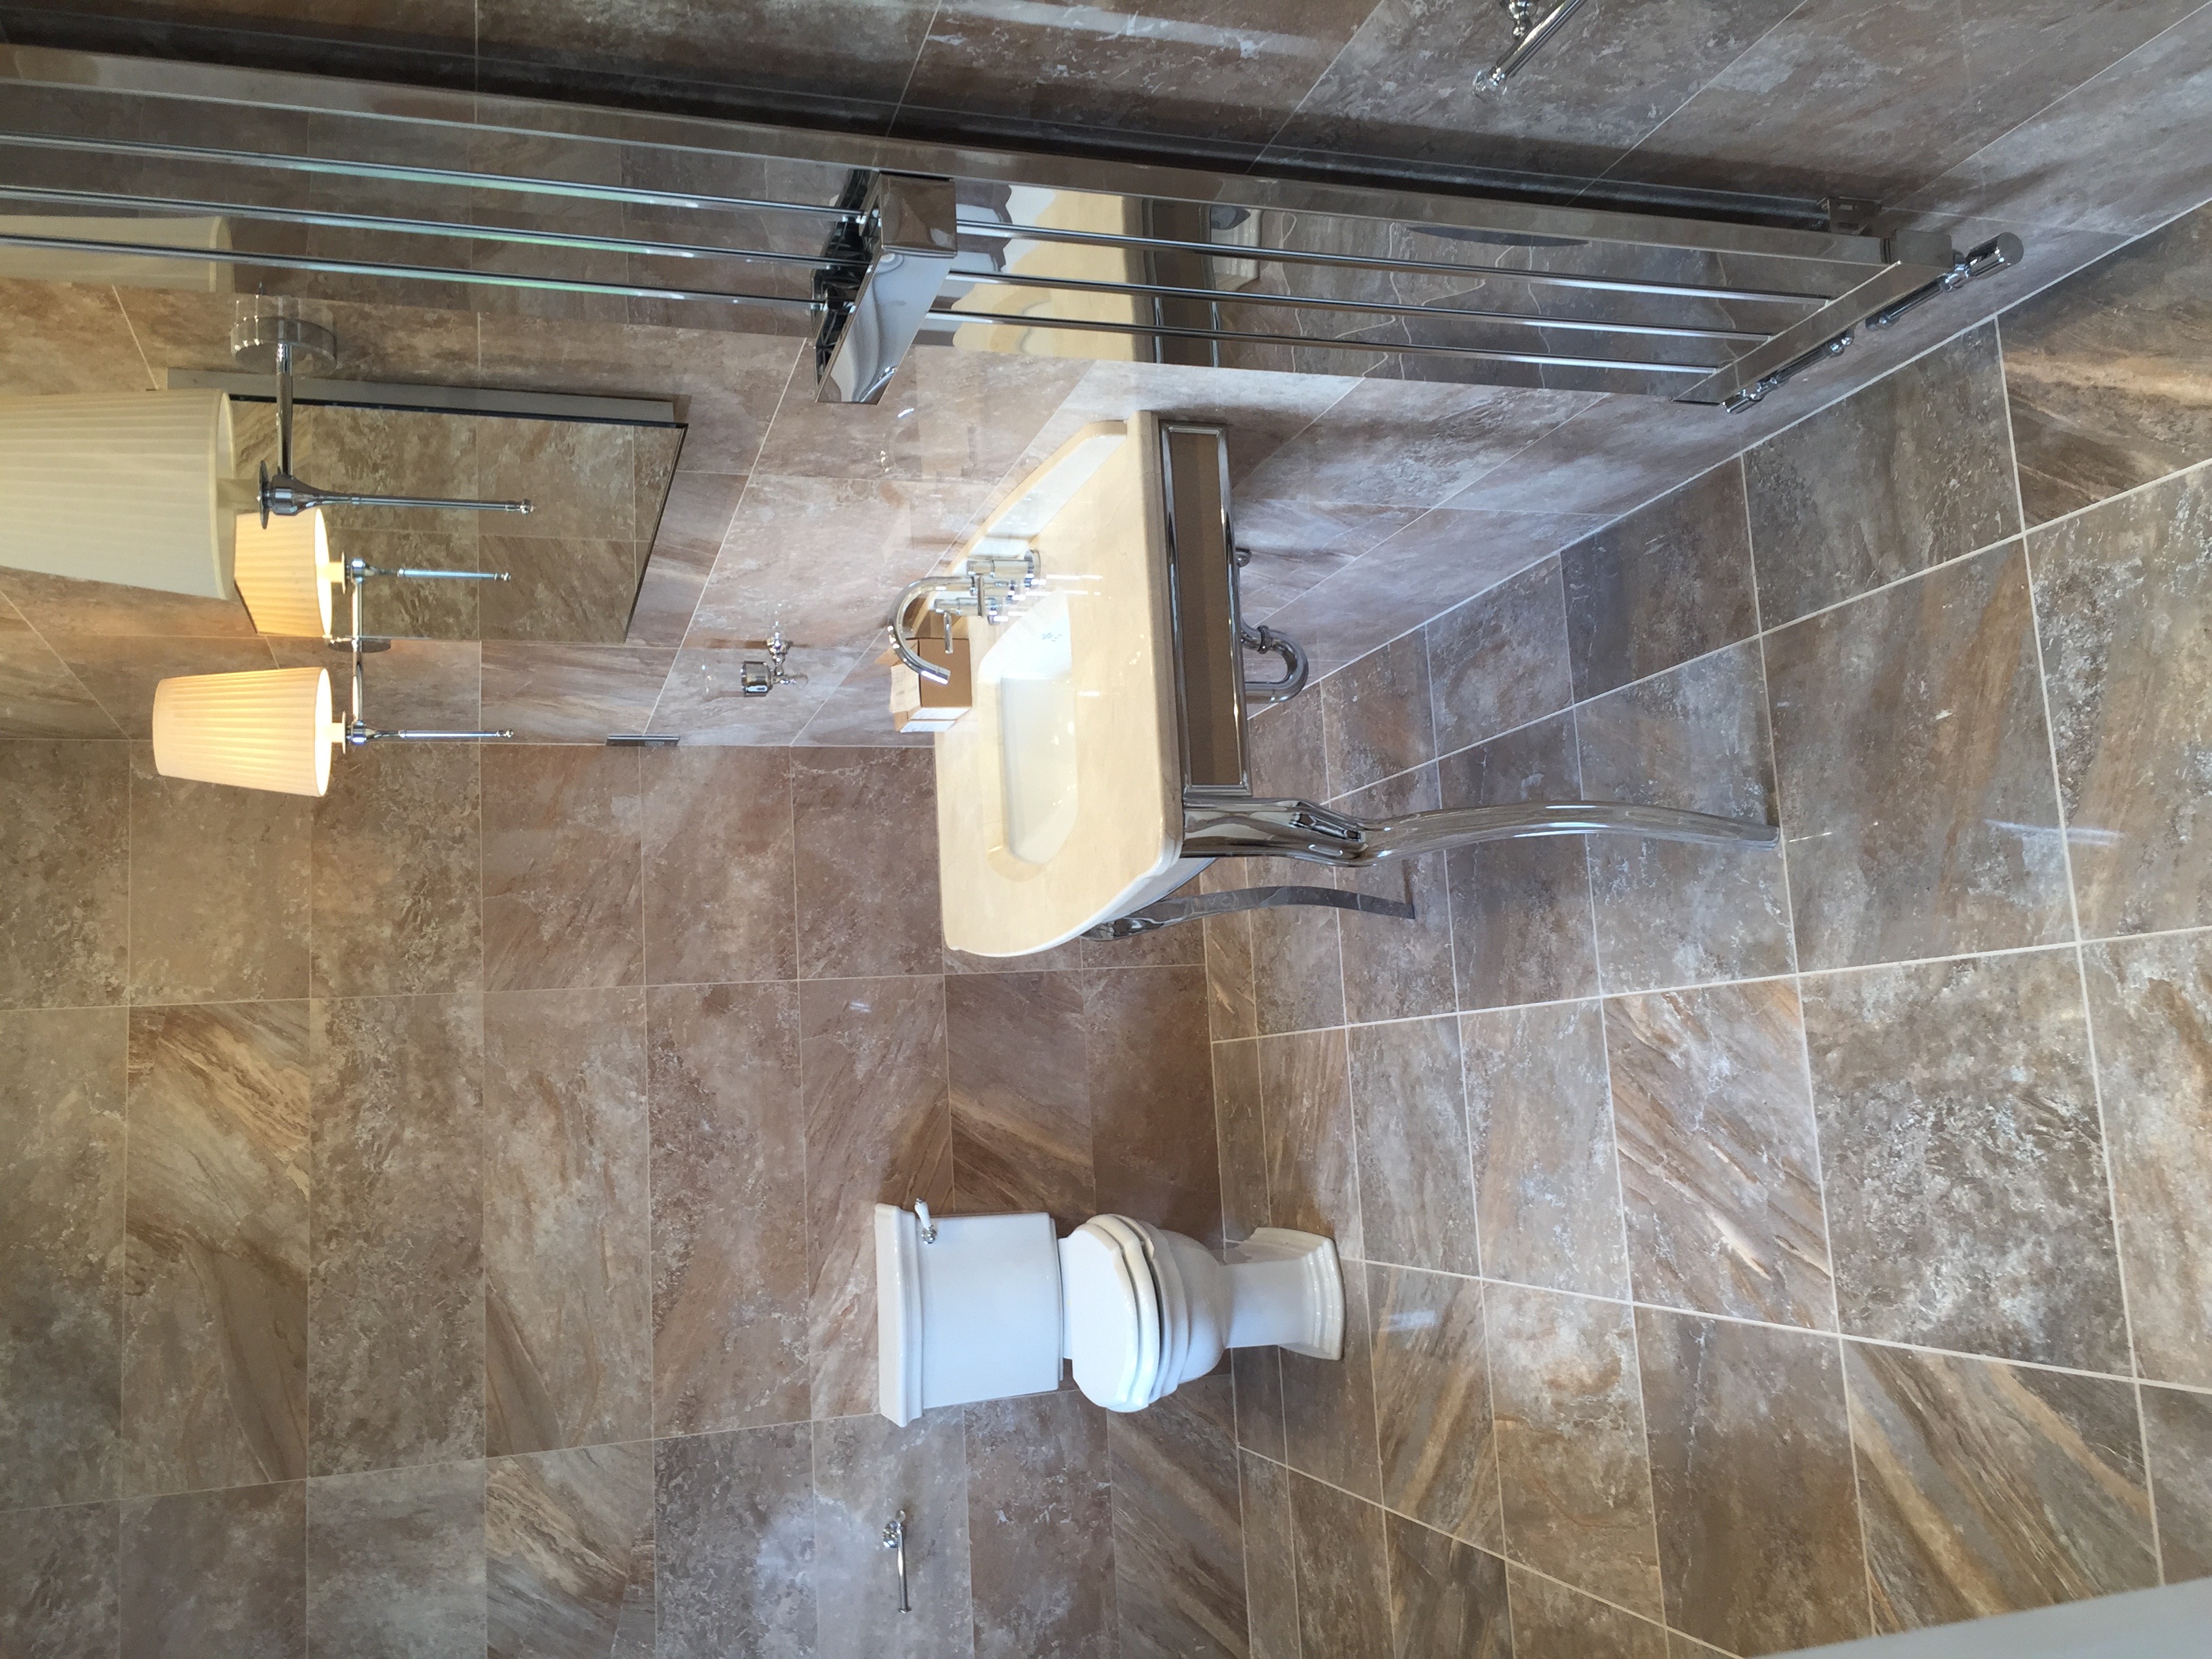 Specsavers - Derby Tiling Project